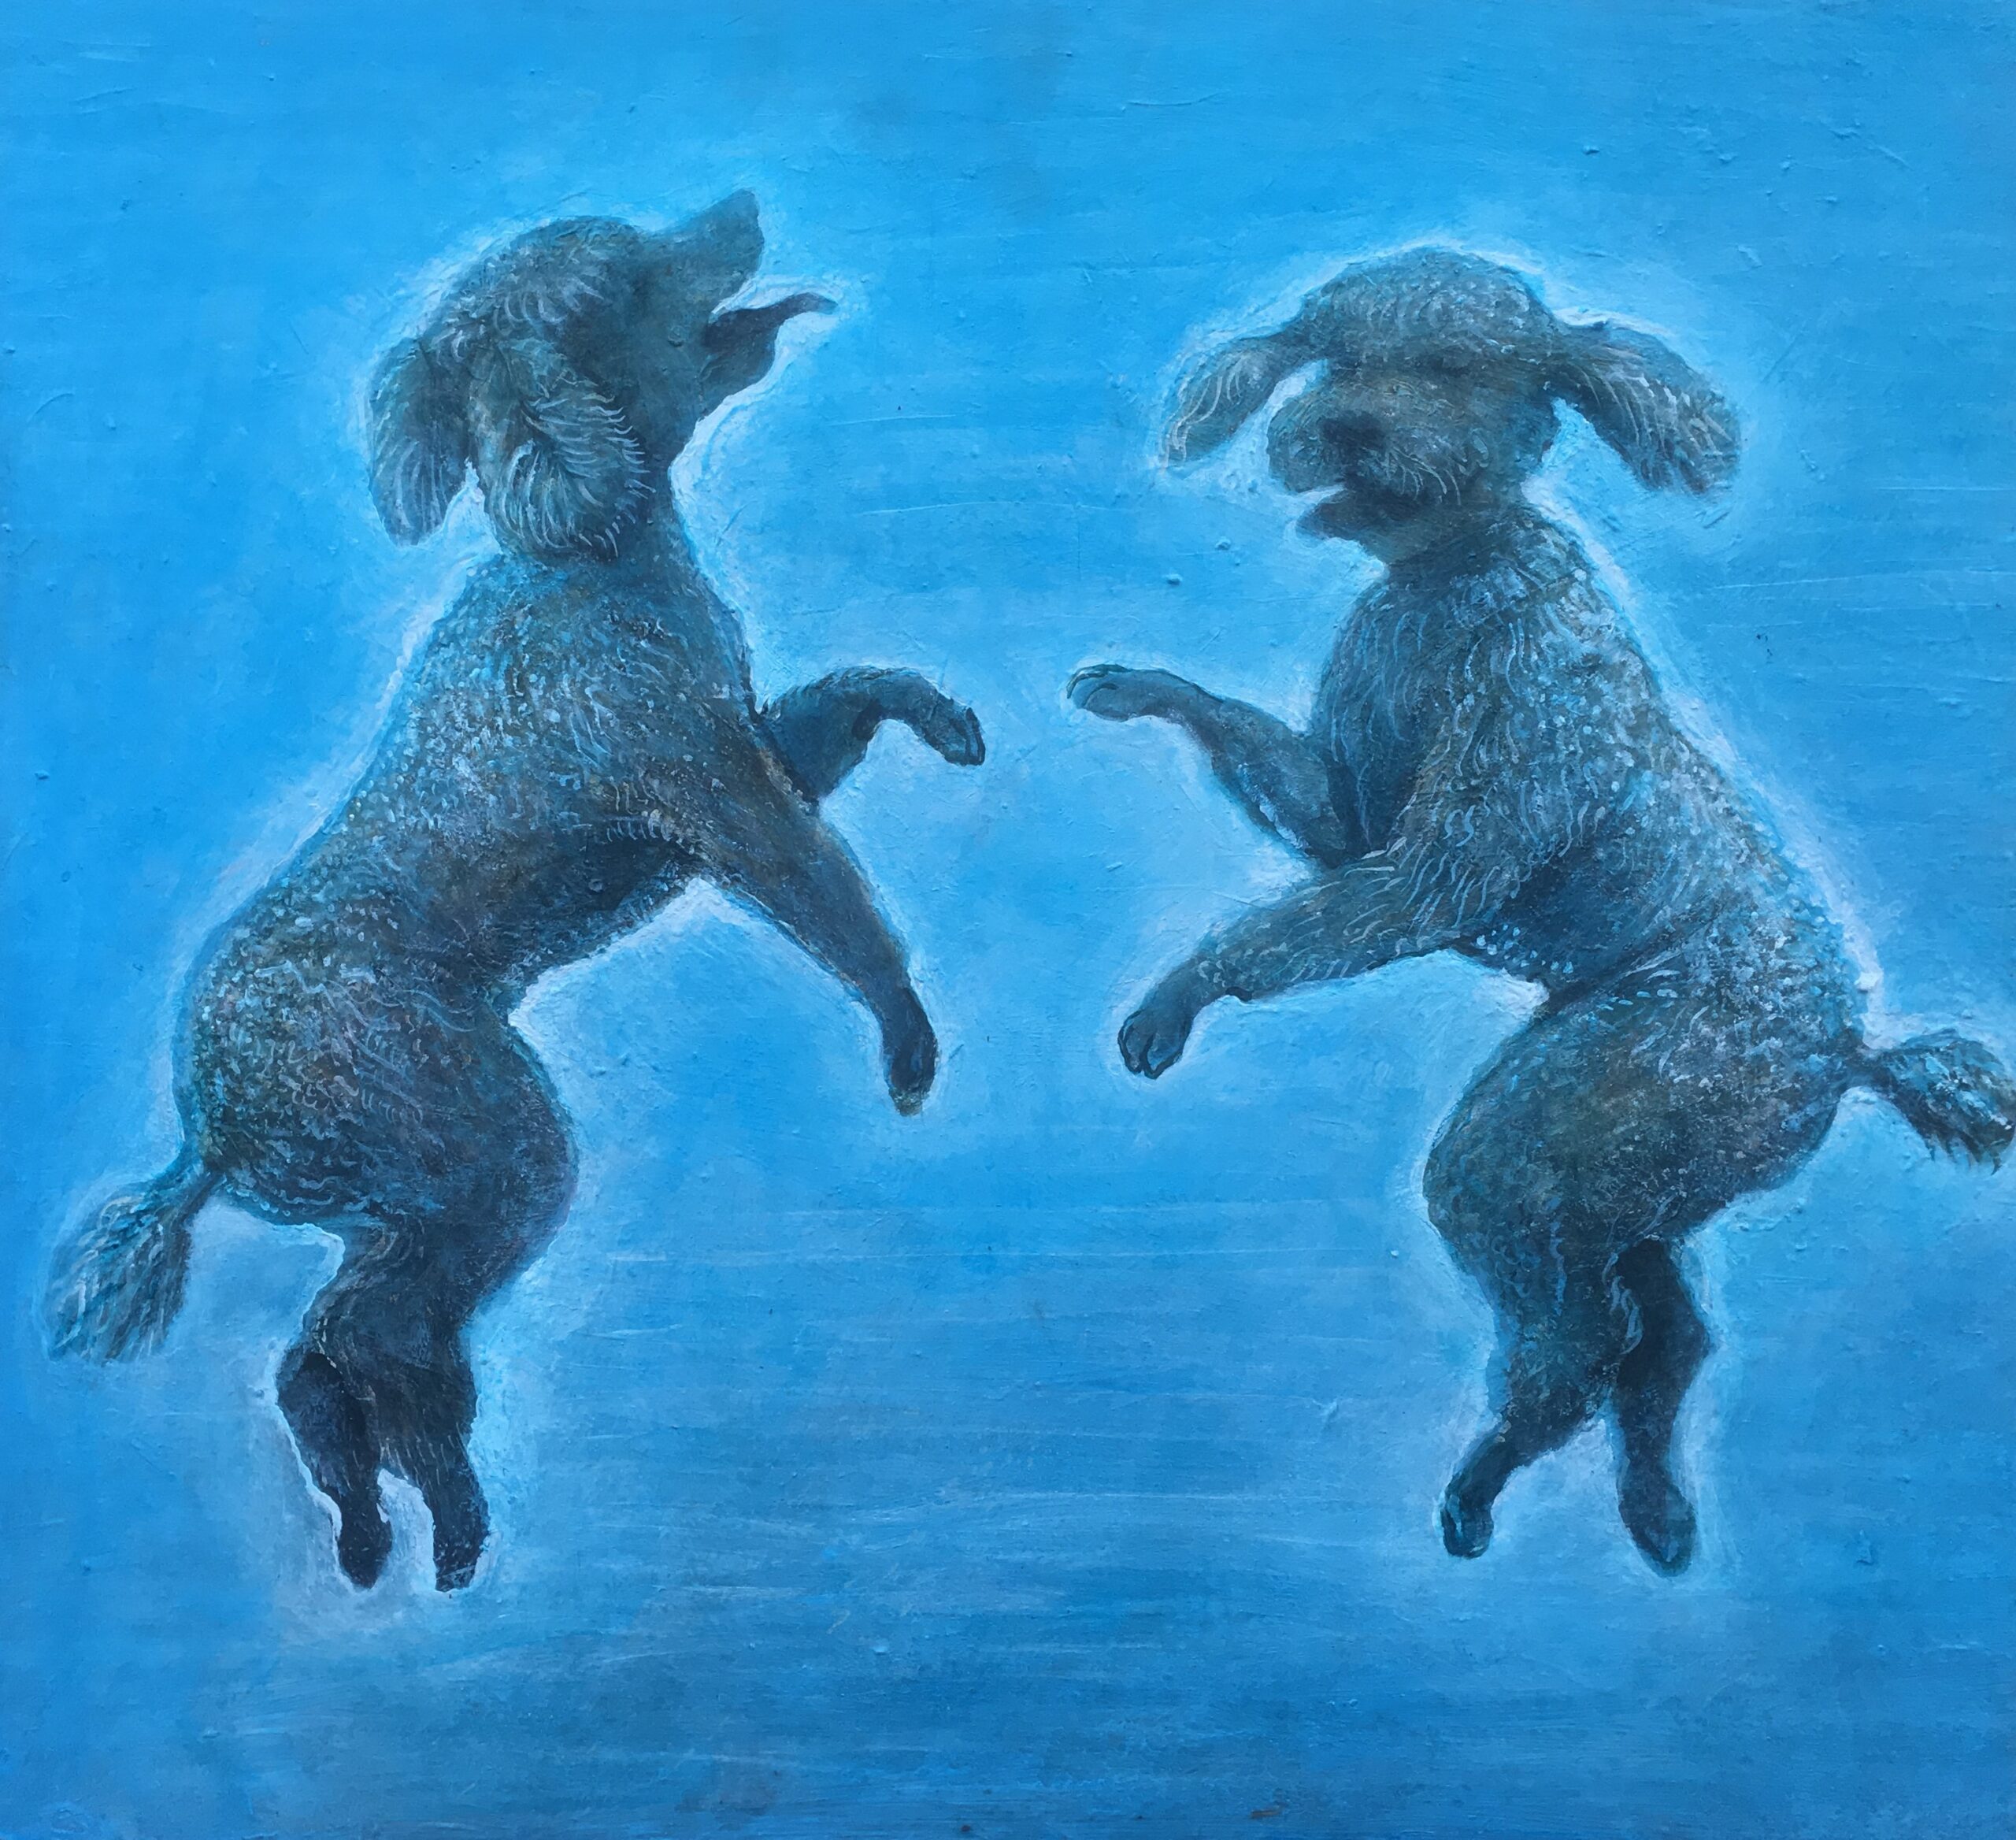 Painting of two poodles in a blue background